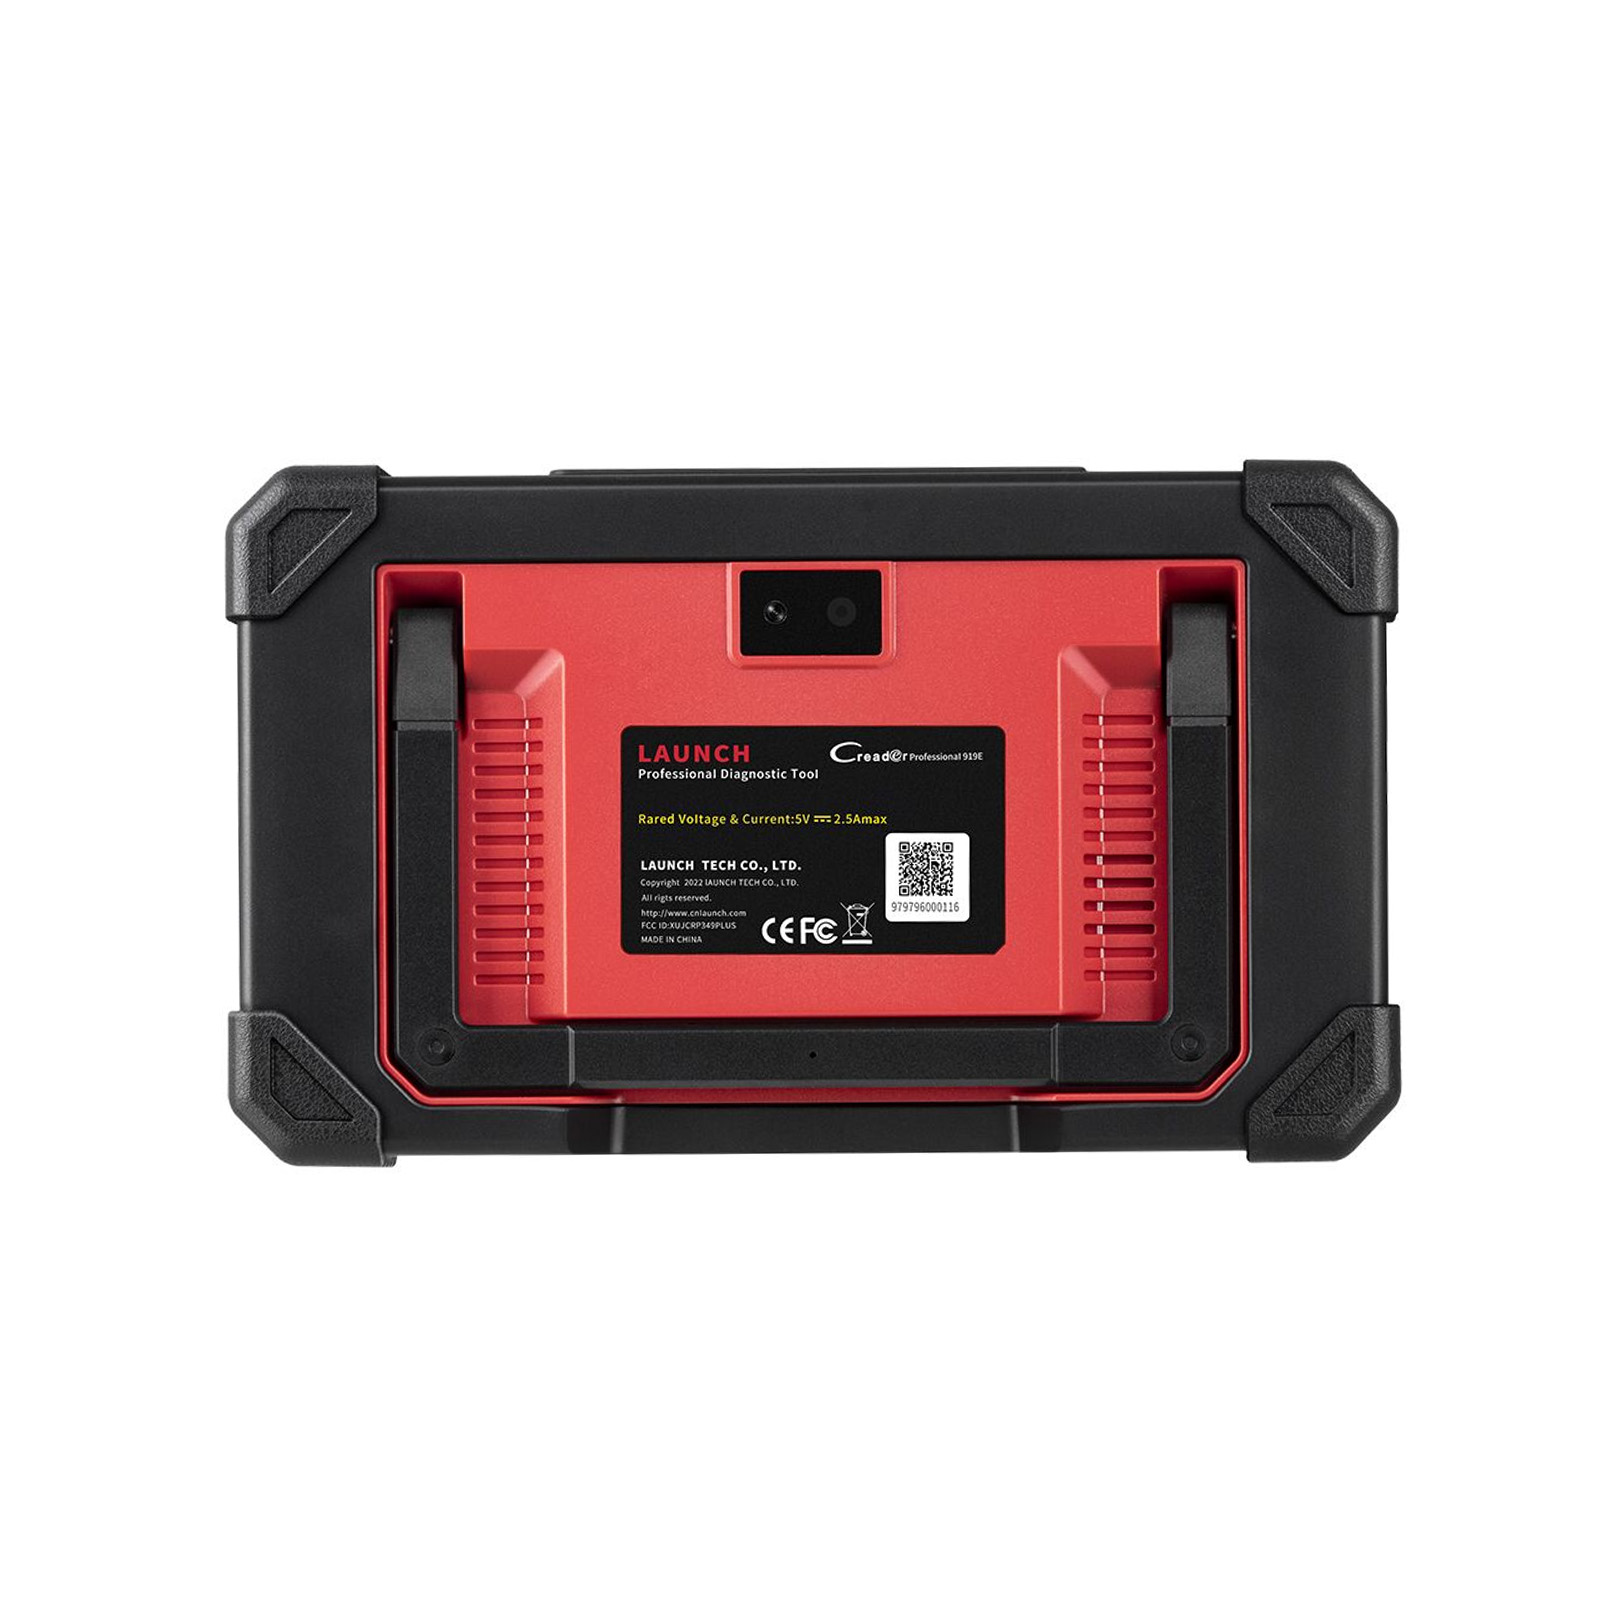 LAUNCH X431 CRP919E Car Diagnostic Tool Scanner Full System Automotive  Scanner Active Test CANFD/DIOP with 29+ Reset Global version